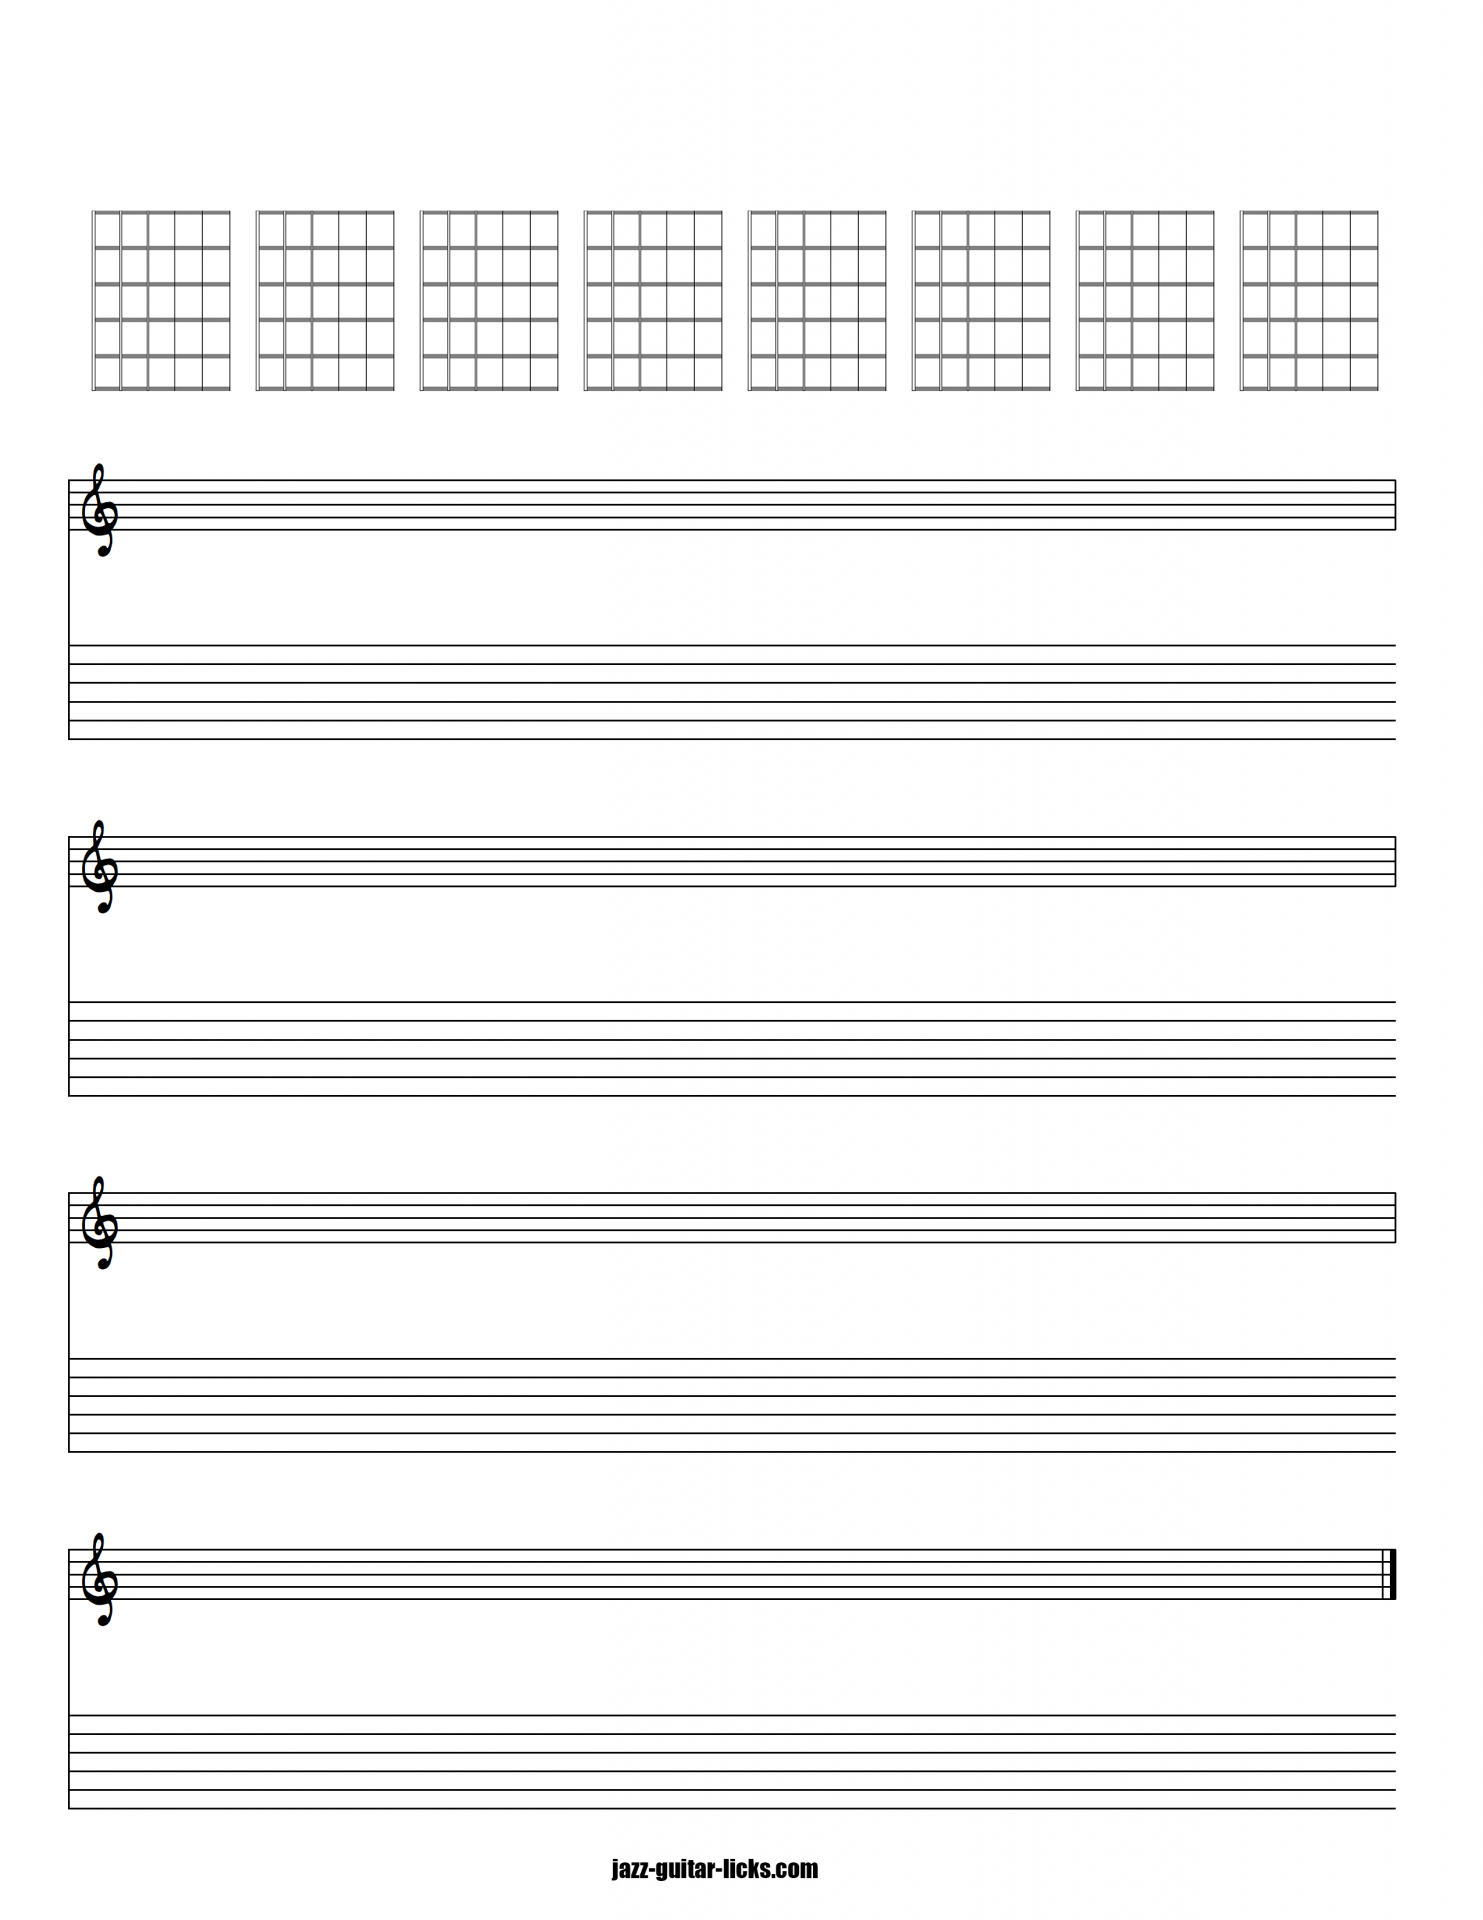 free-printable-guitar-sheet-music-printable-form-templates-and-letter